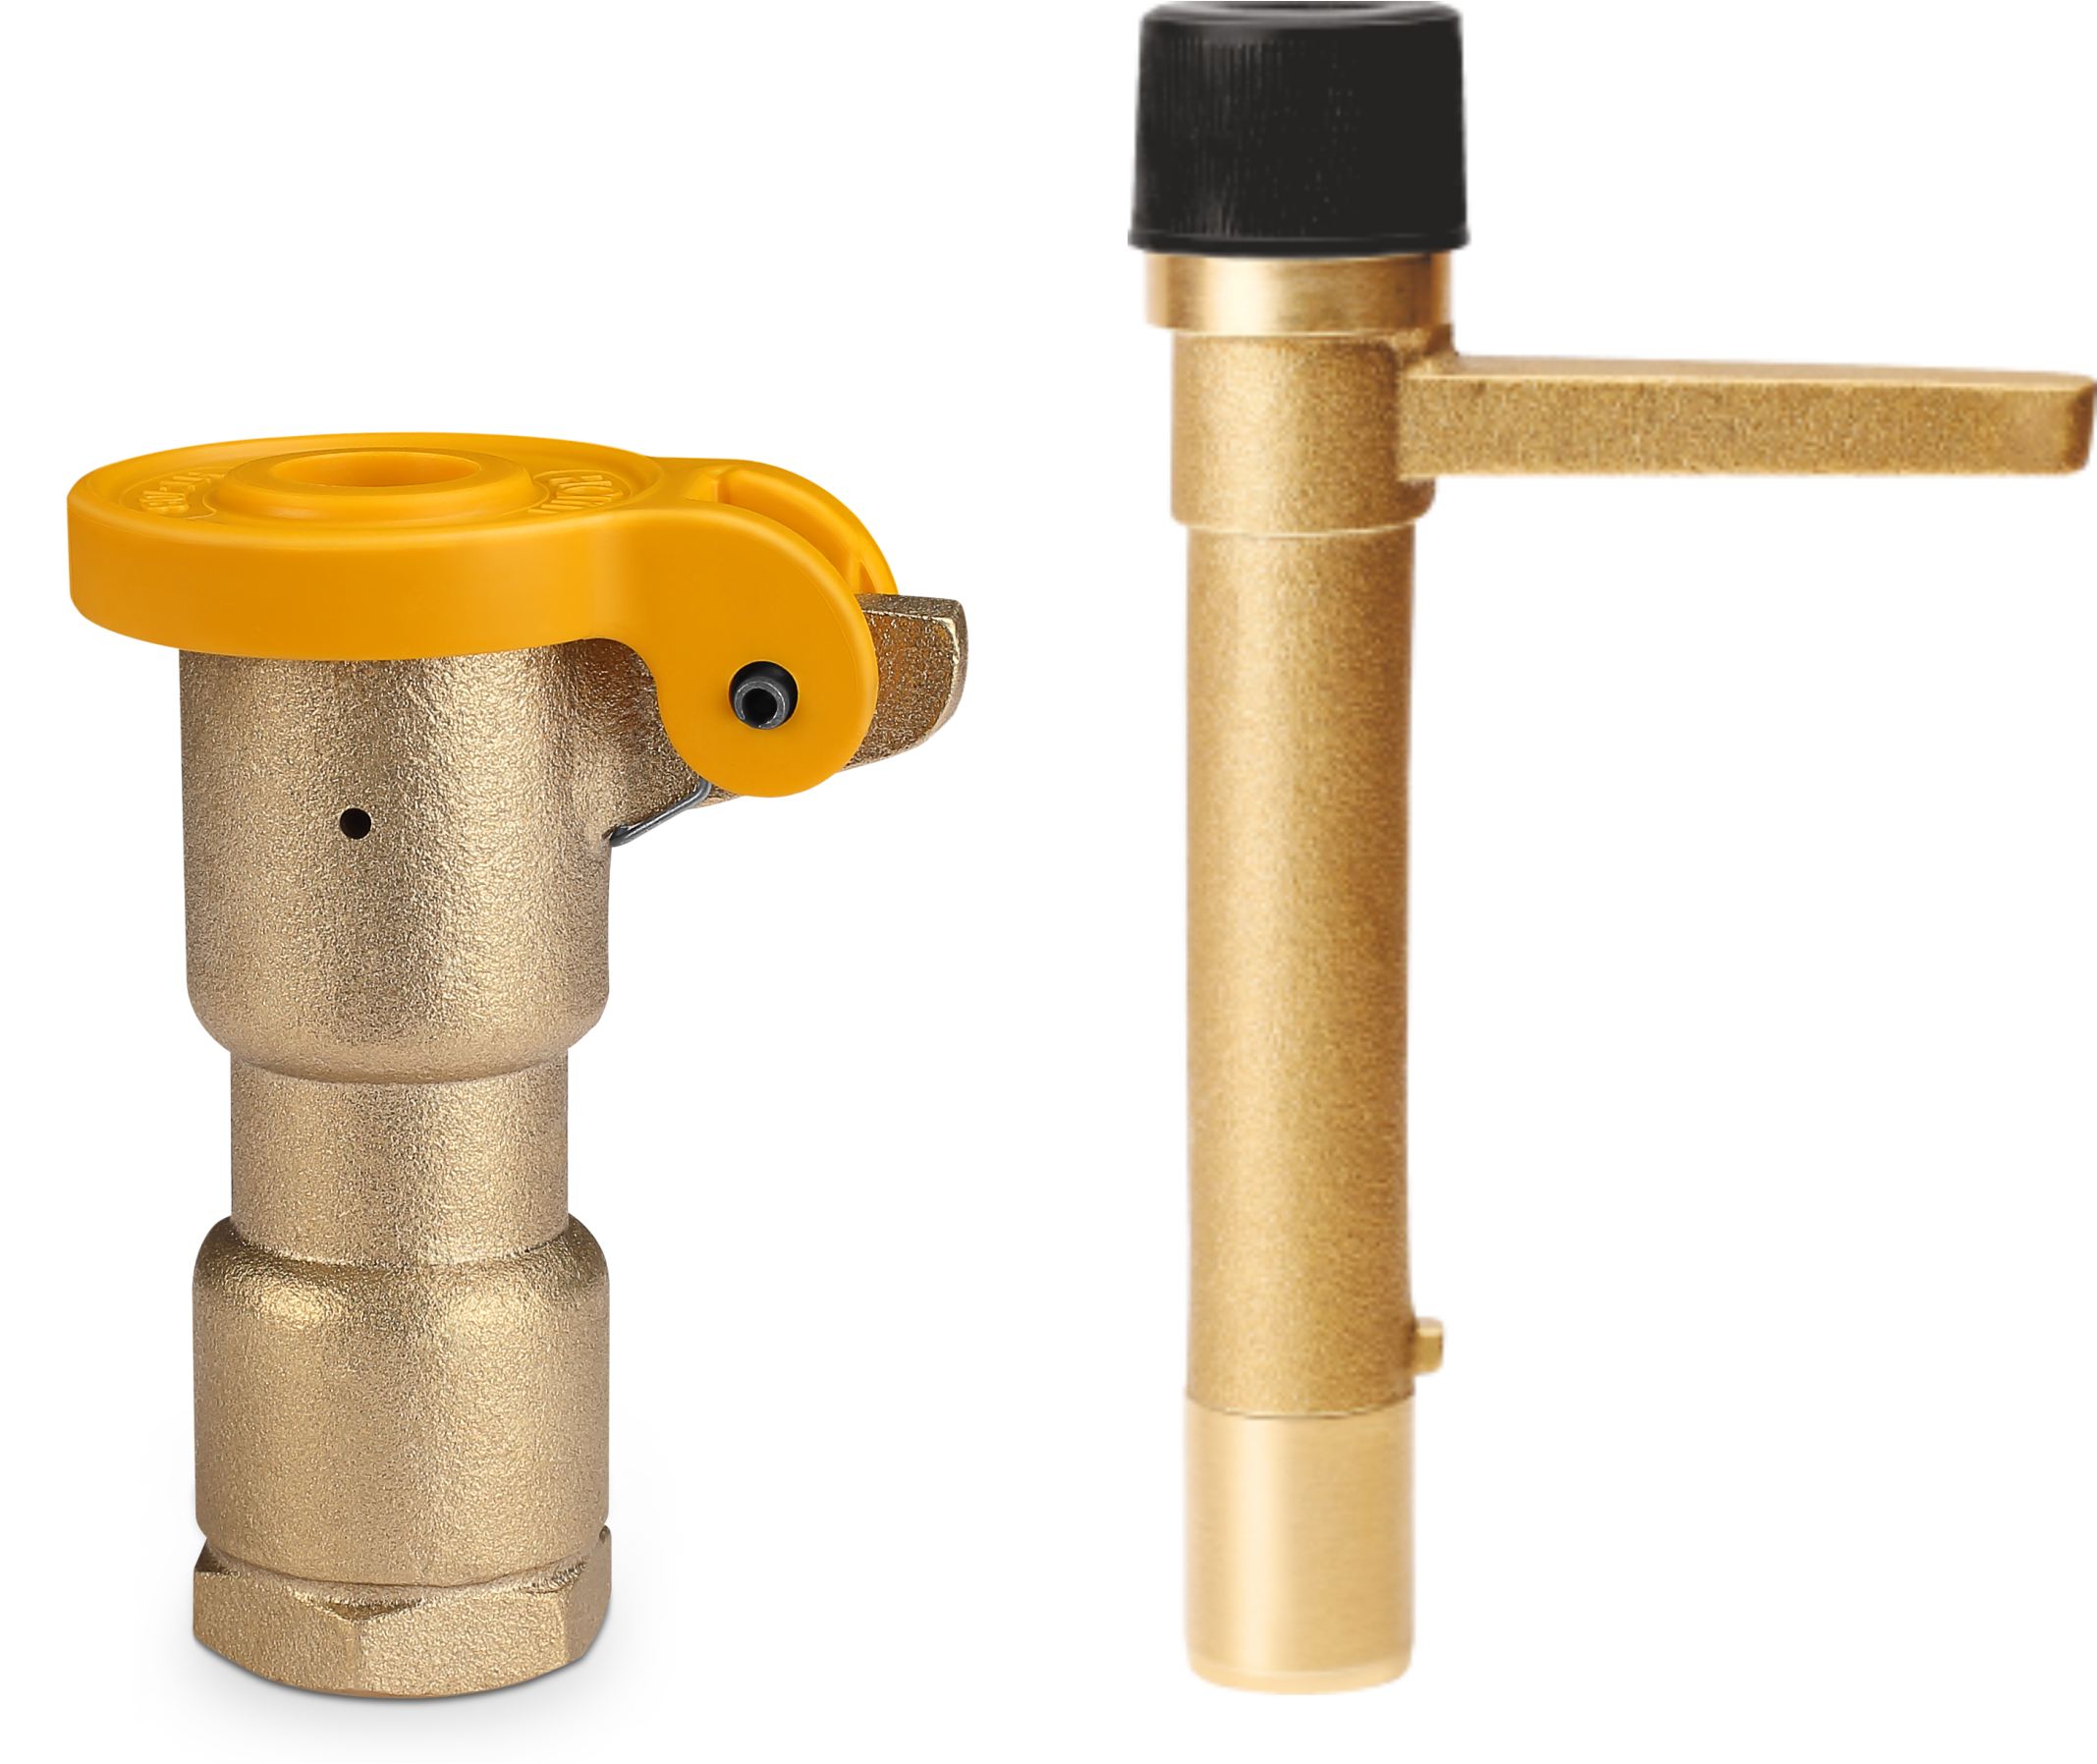 Brass Quick Coupling Valve And Key